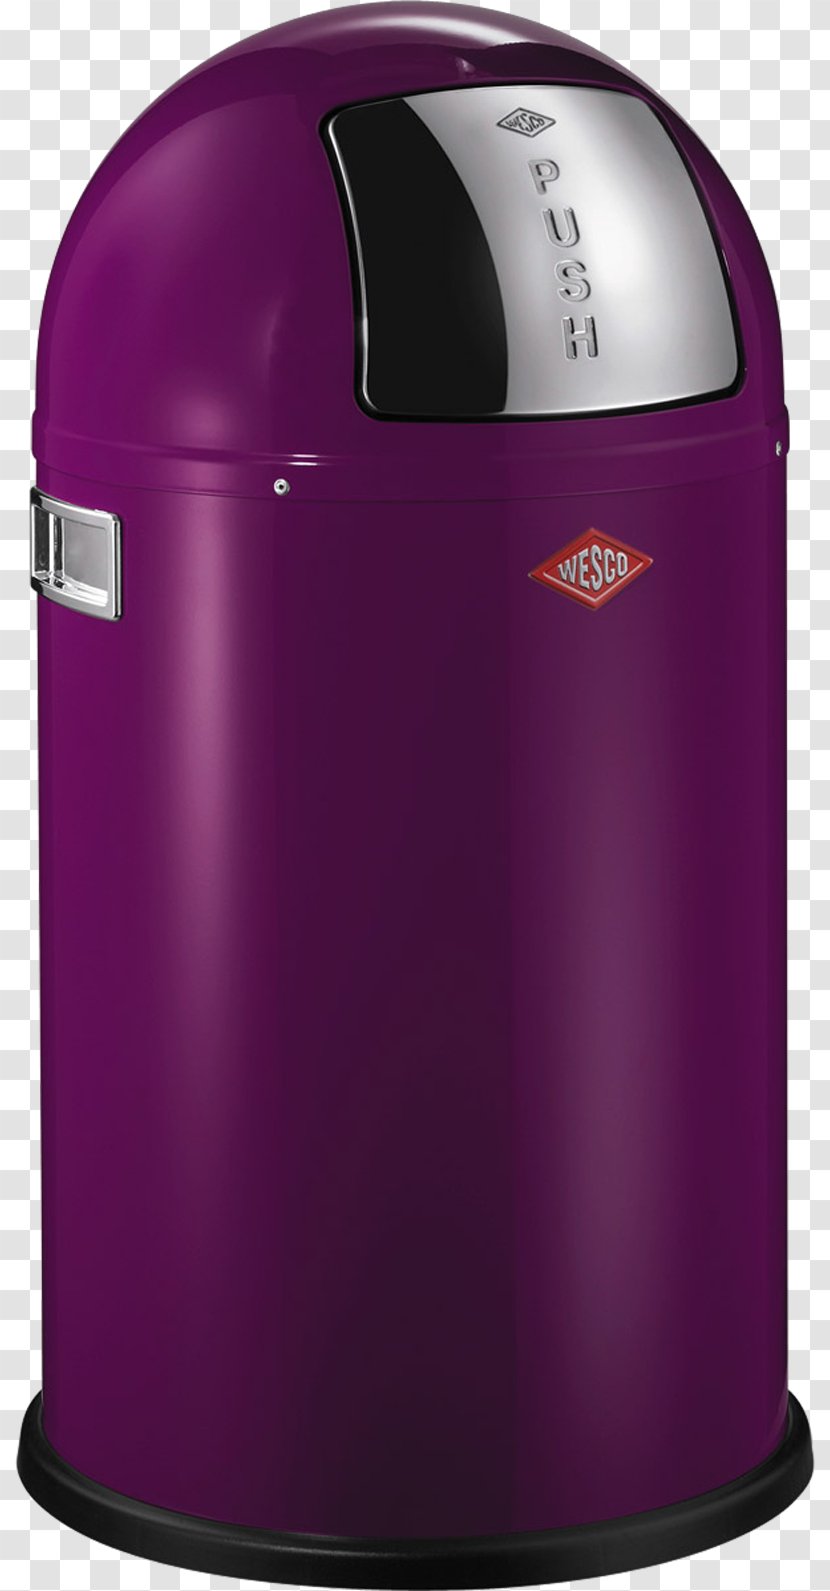 Rubbish Bins & Waste Paper Baskets Wesco Pushboy Junior 175 11.4 Gallon Swing Top Trash Can Liter - Container - Frank L Culbertson Jr Transparent PNG